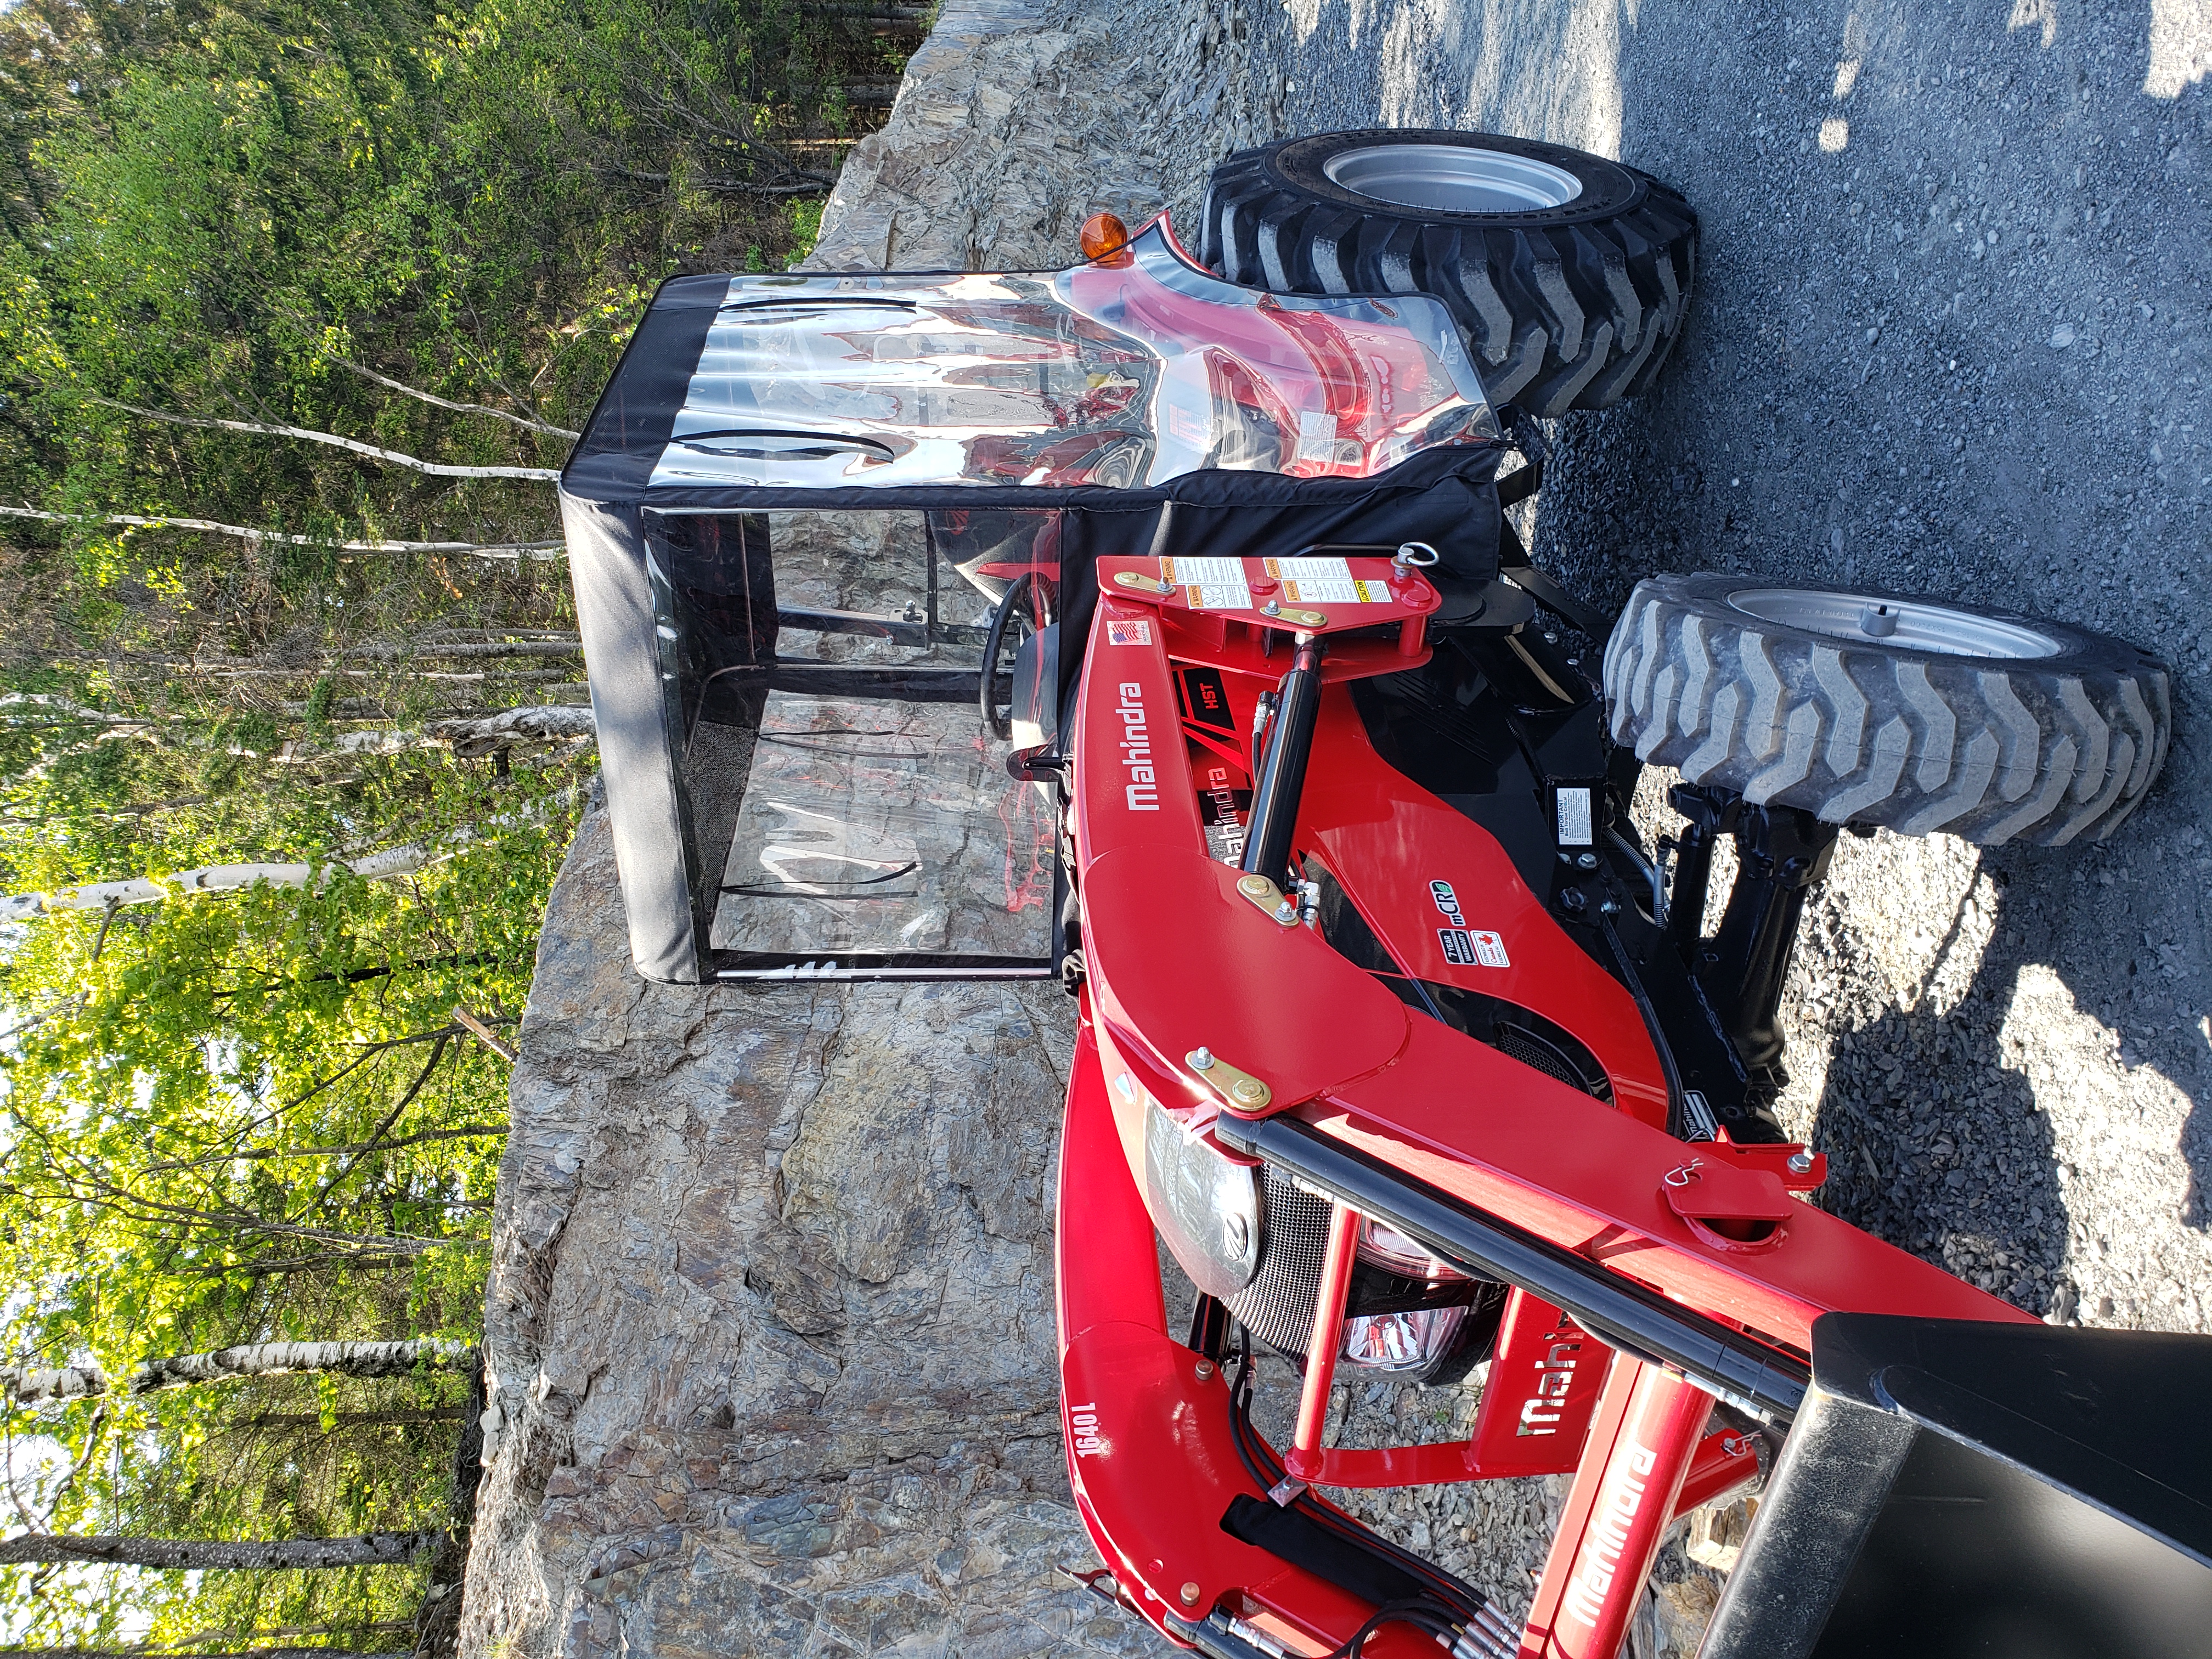 40" Winter cab for compact tractors